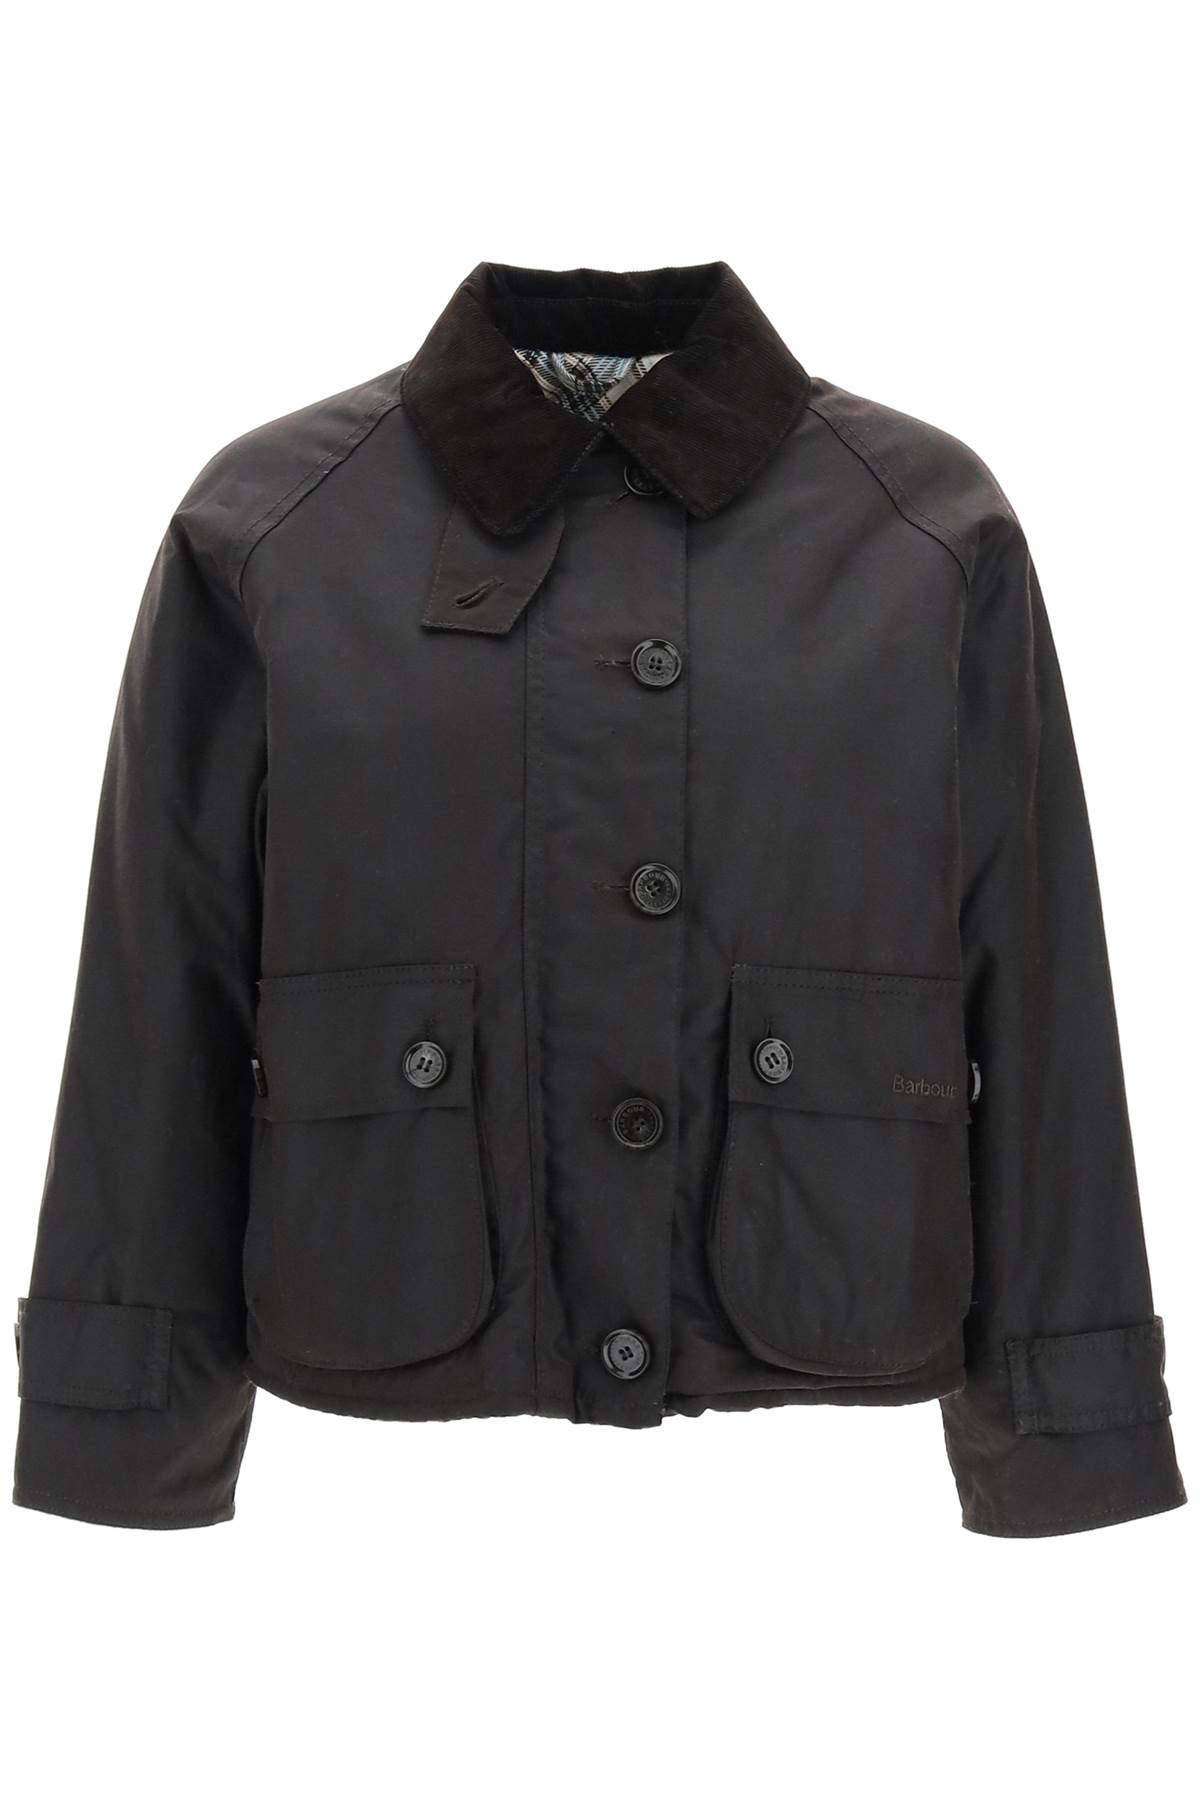 Barbour blair Waxed Jacket